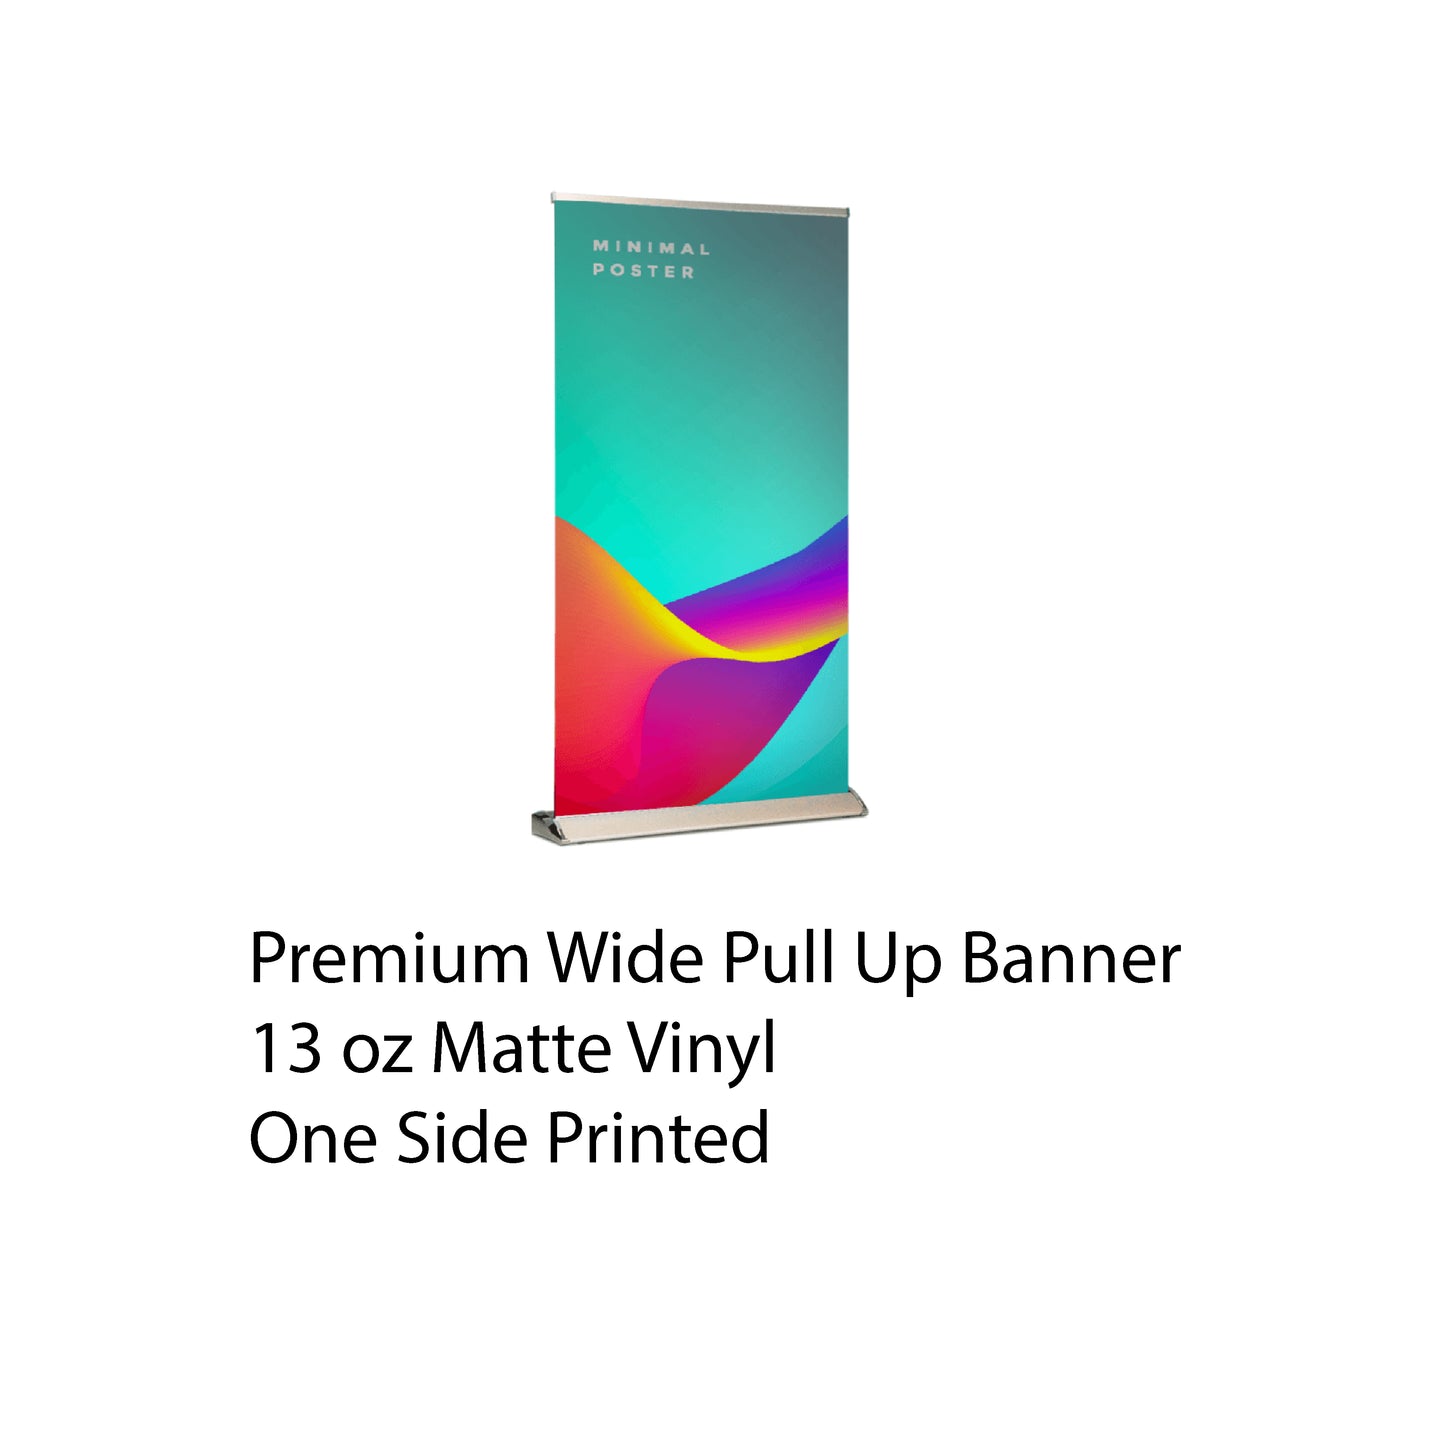 Premium Wide Pull Up Banners, One Side Printed Custom Banner, Pull Up Banners